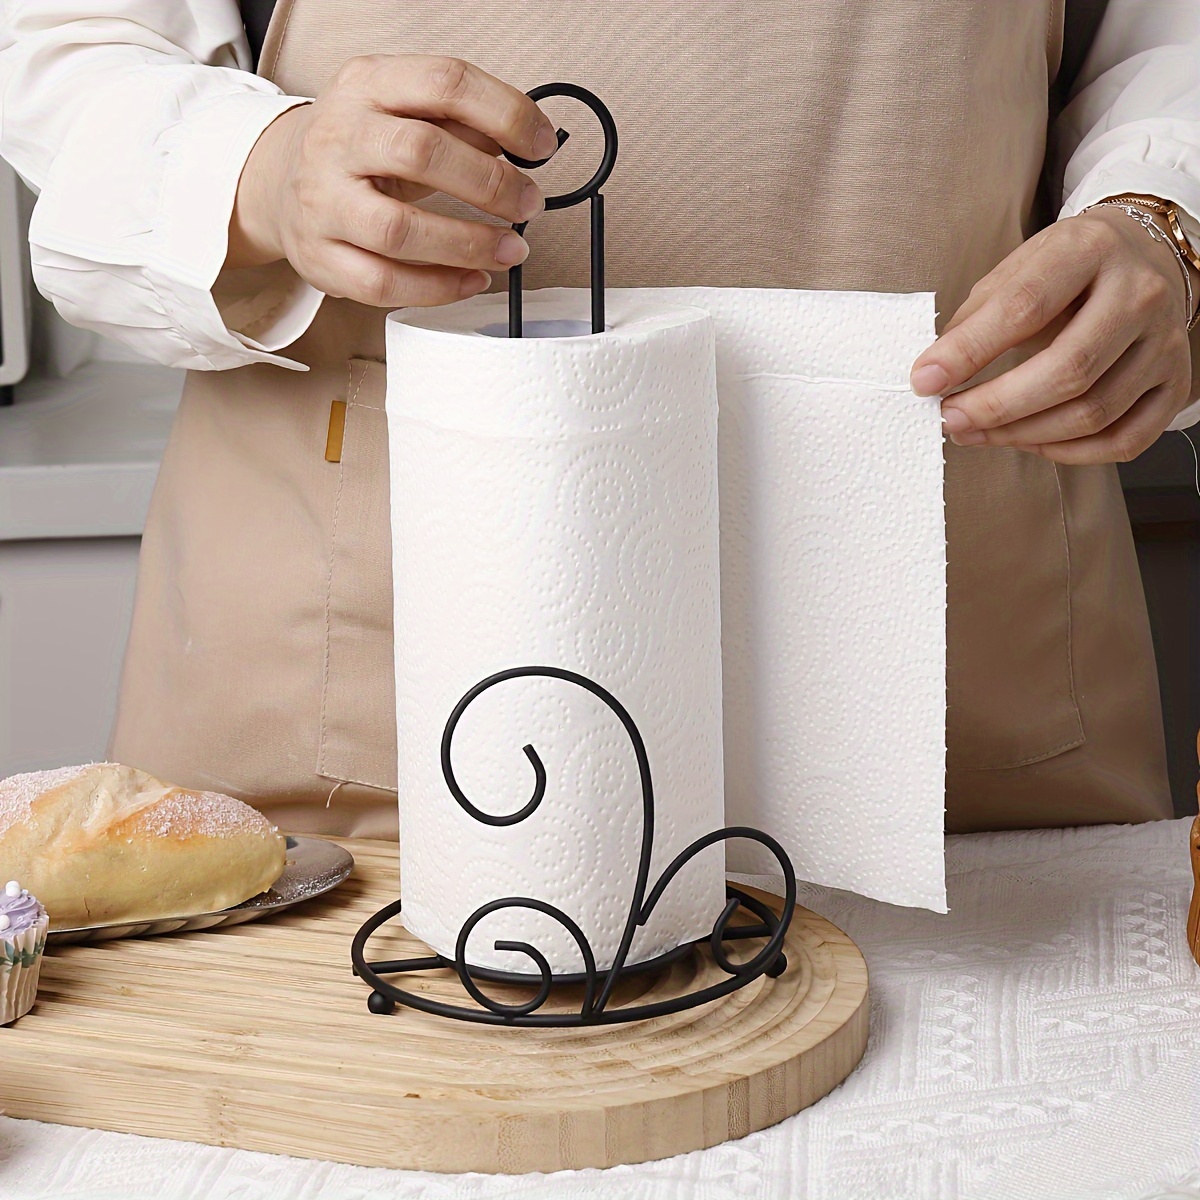 MAKE AND SELL 🤑 holder towel paper for your kitchen easy and decorative !!  